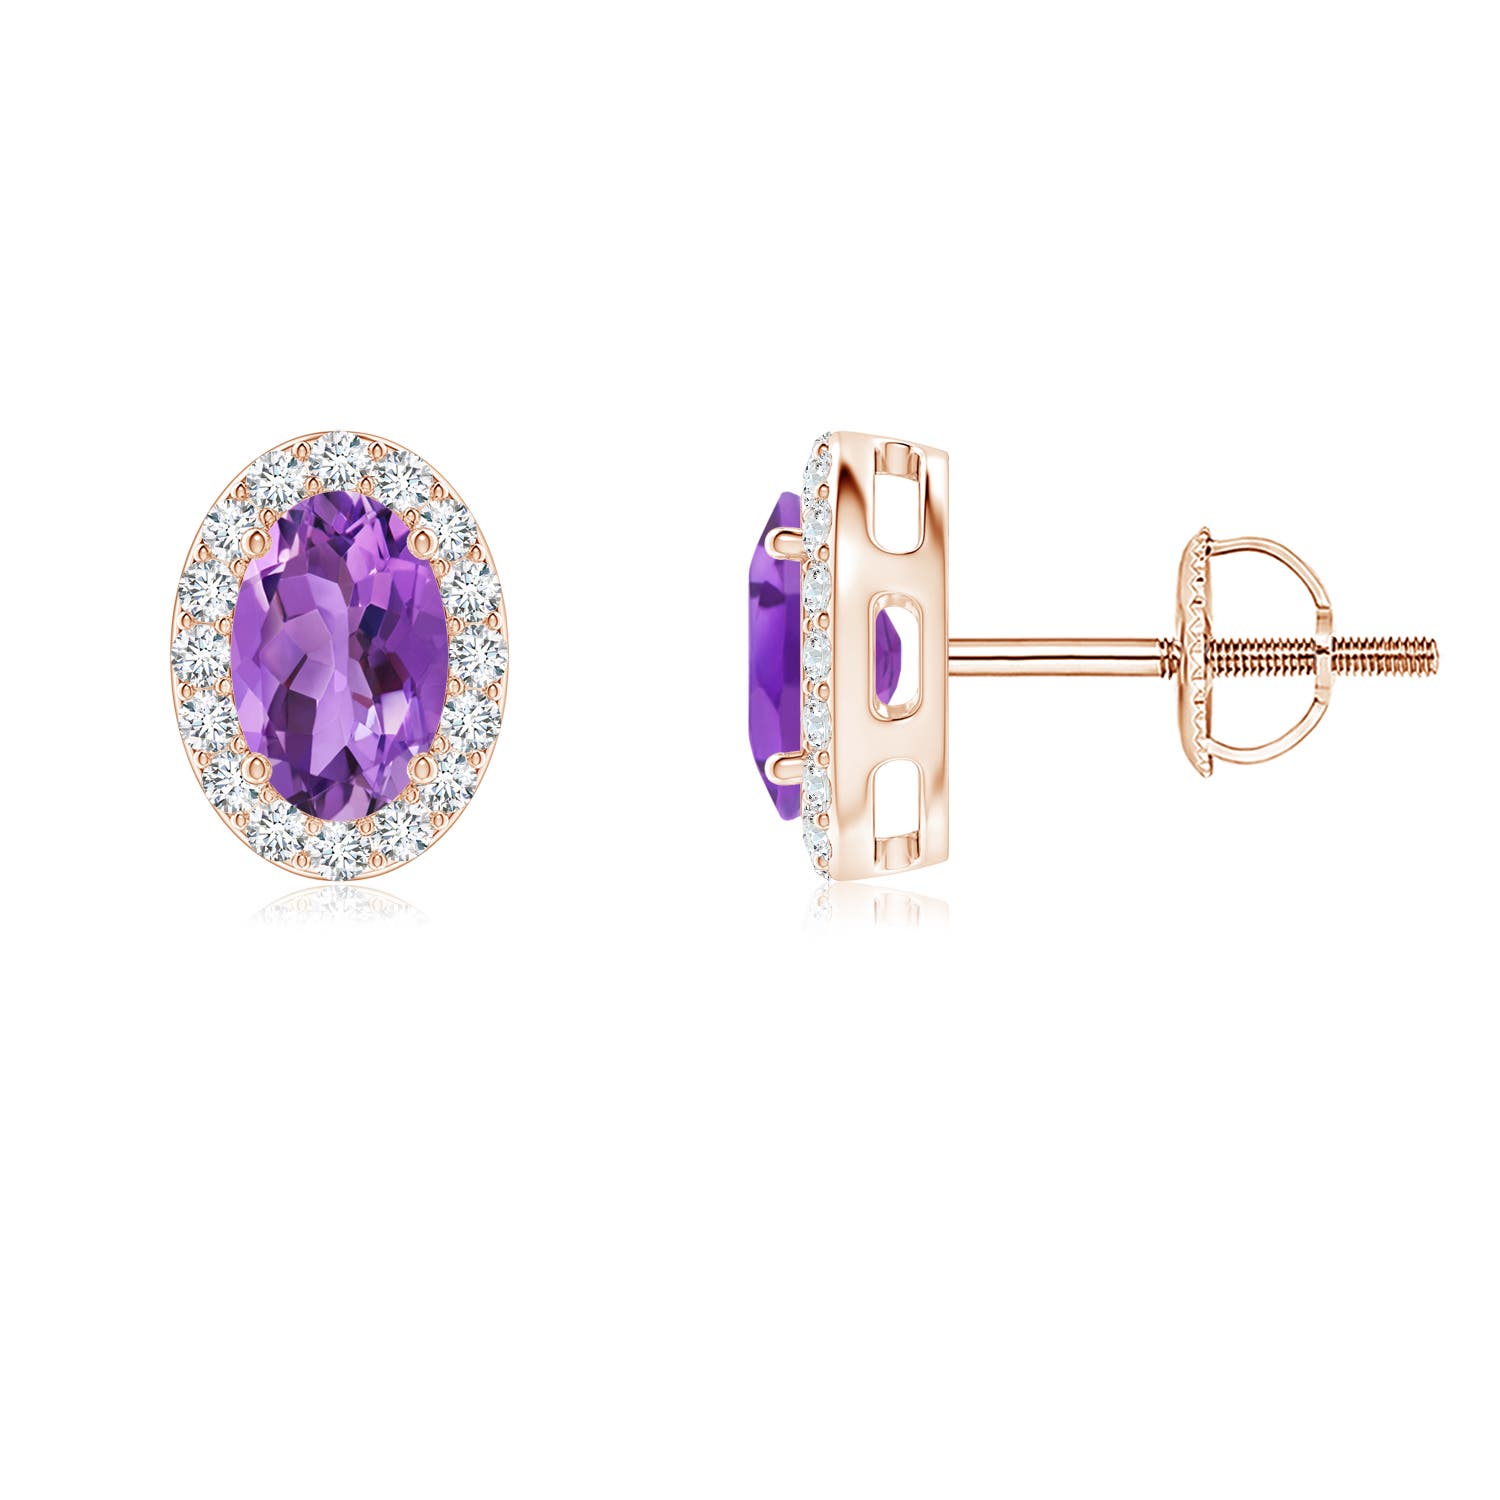 AA - Amethyst / 0.99 CT / 14 KT Rose Gold